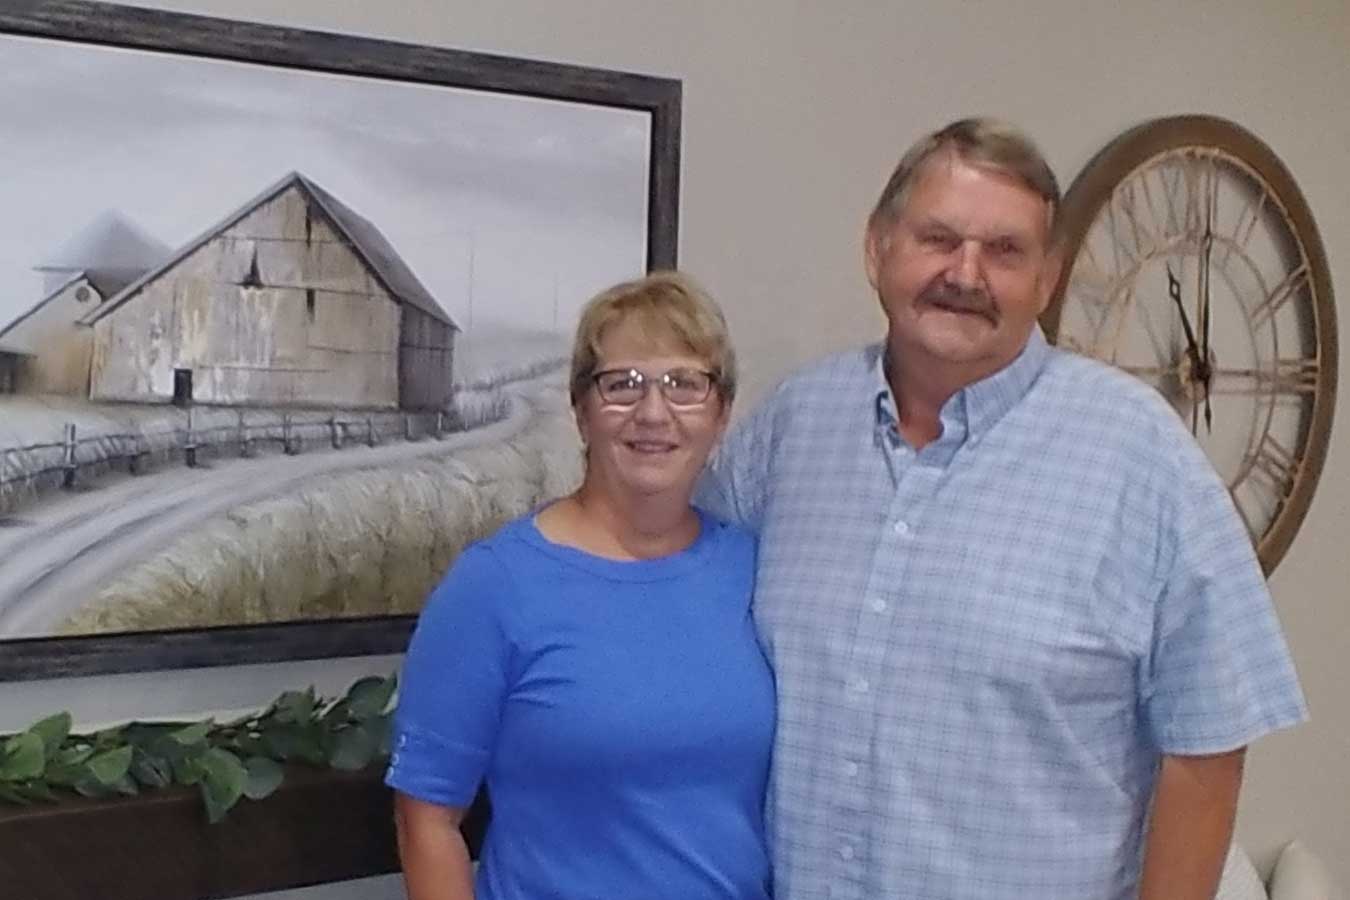 Linda and Dan Stewart appreciate farm life, through the artwork in their home, and in their lifestyle. Longtime ag producers in Lake County, will be recognized as the 2021 Ag Bowl Captains.